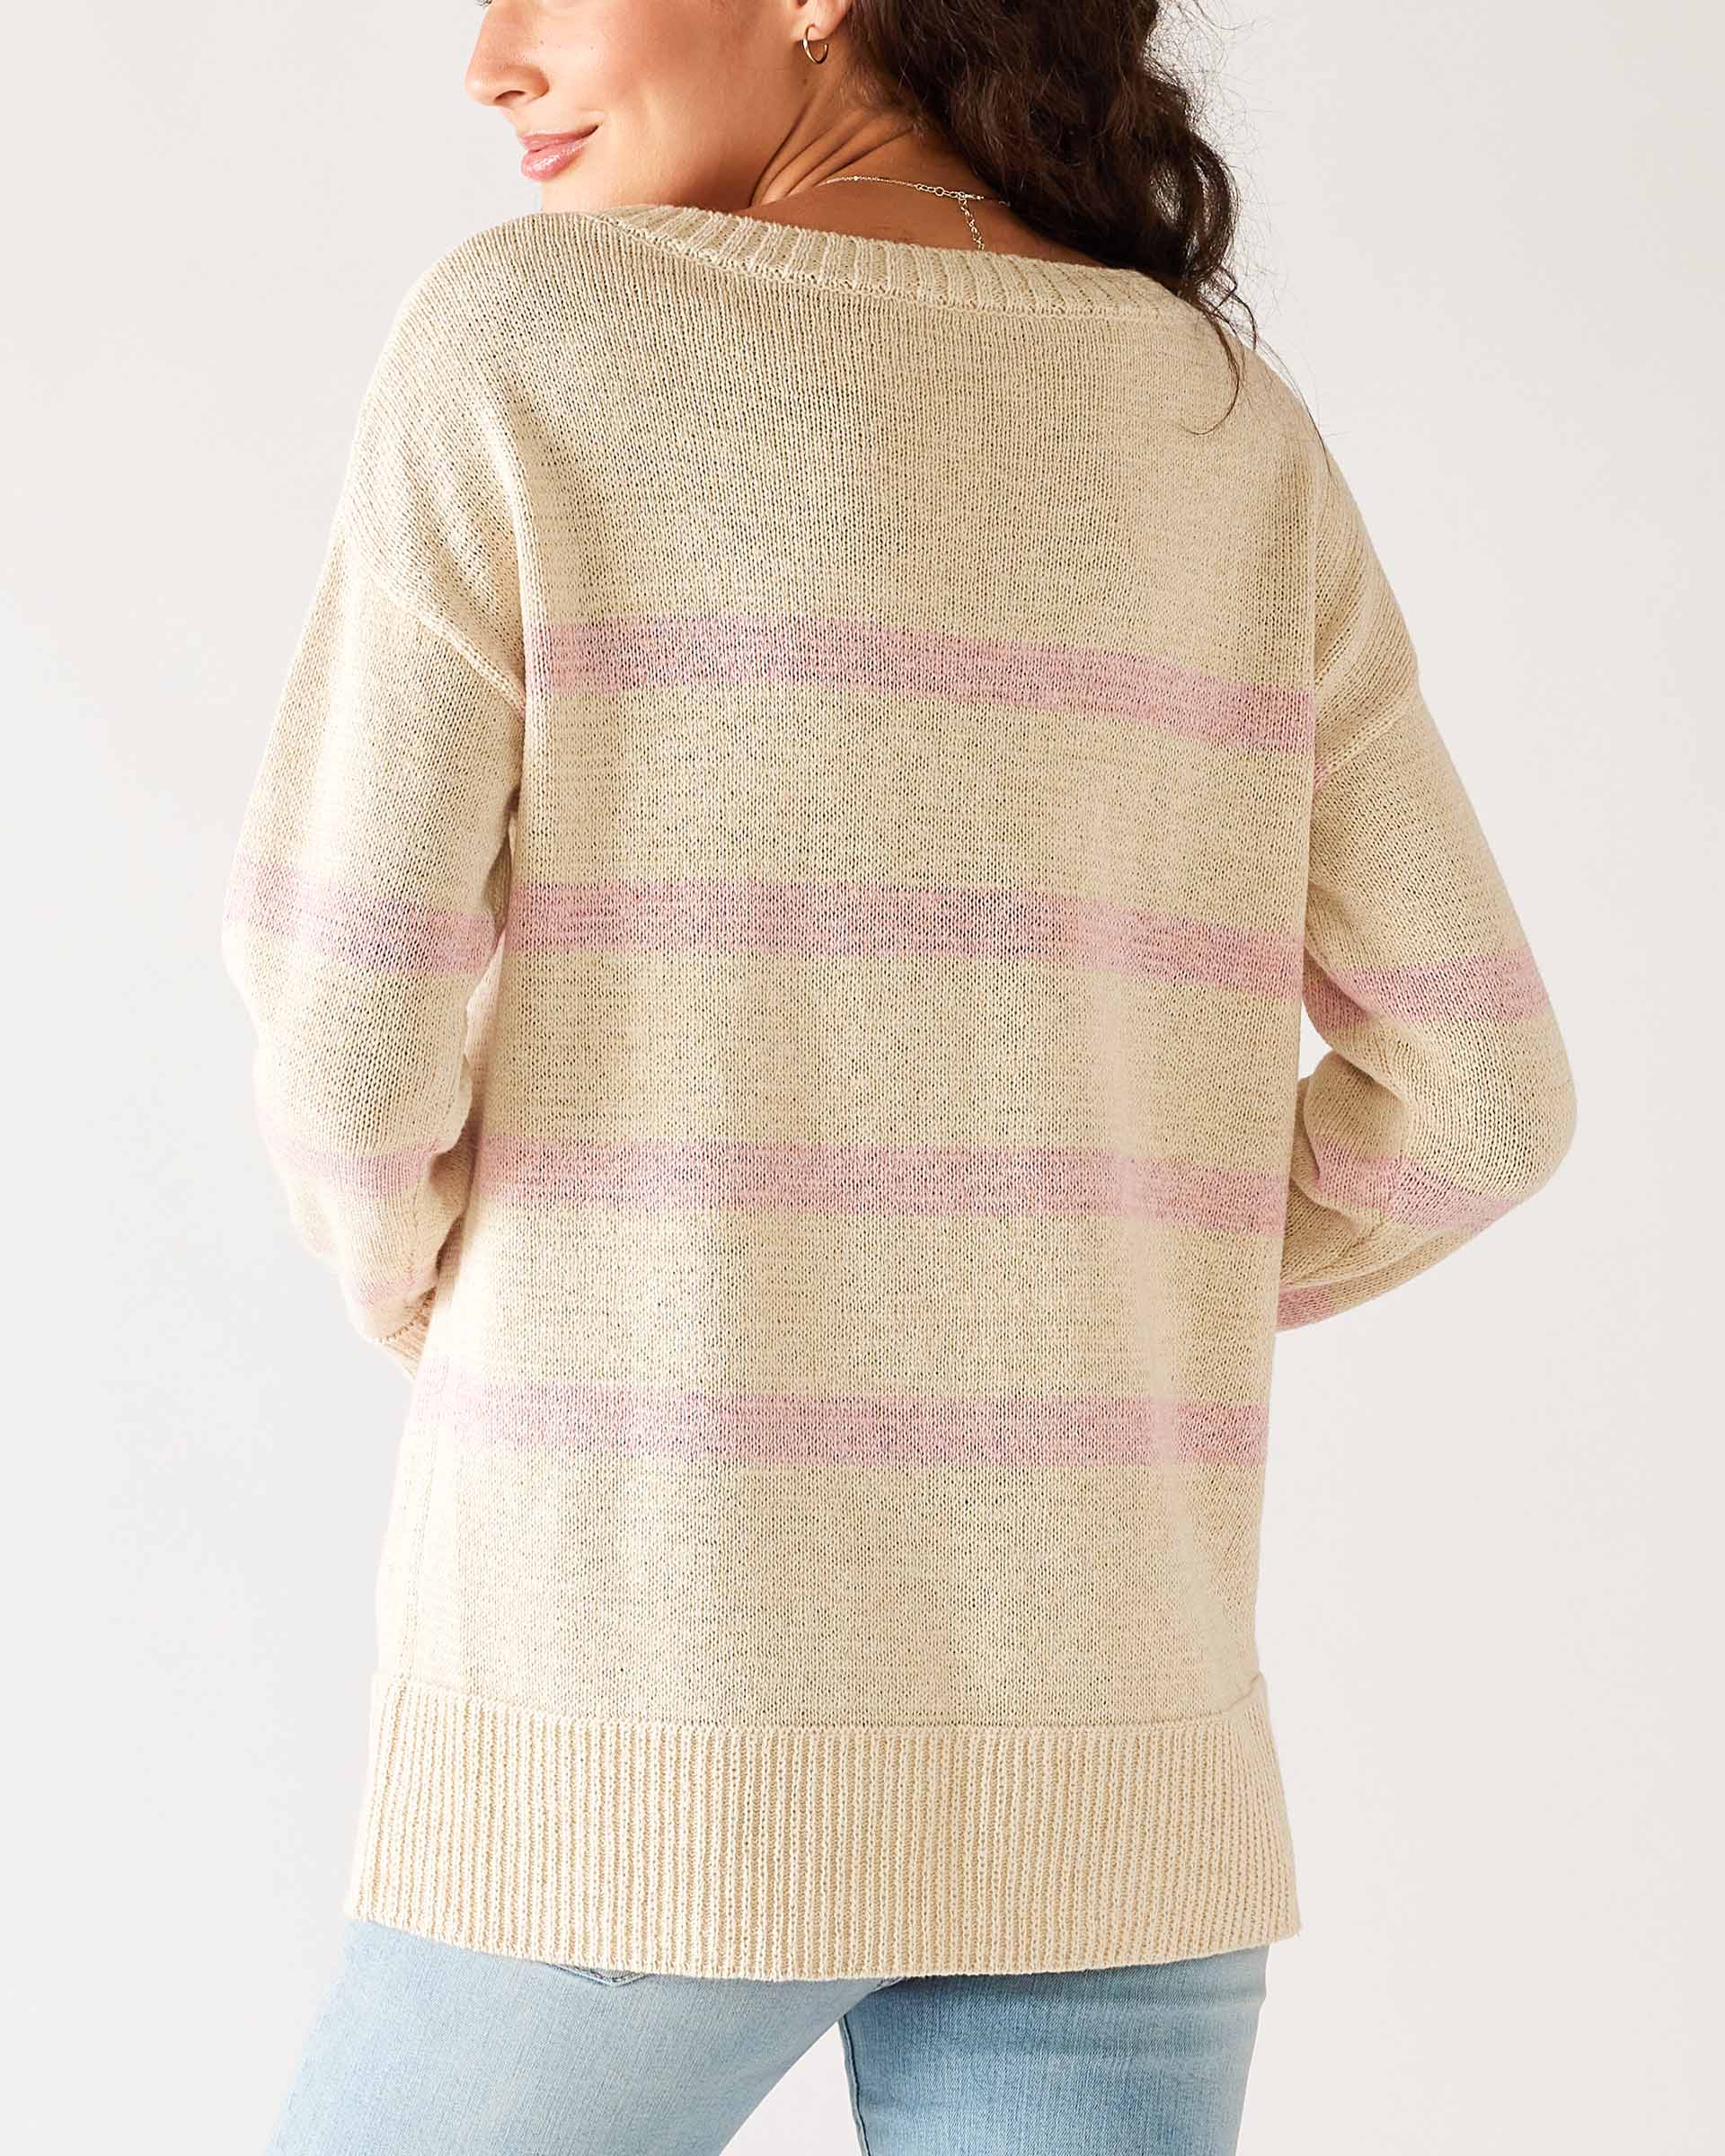 Women's White Heather with Light Pink Striped Lightwieght Crewneck Seasider Sweater Rear View